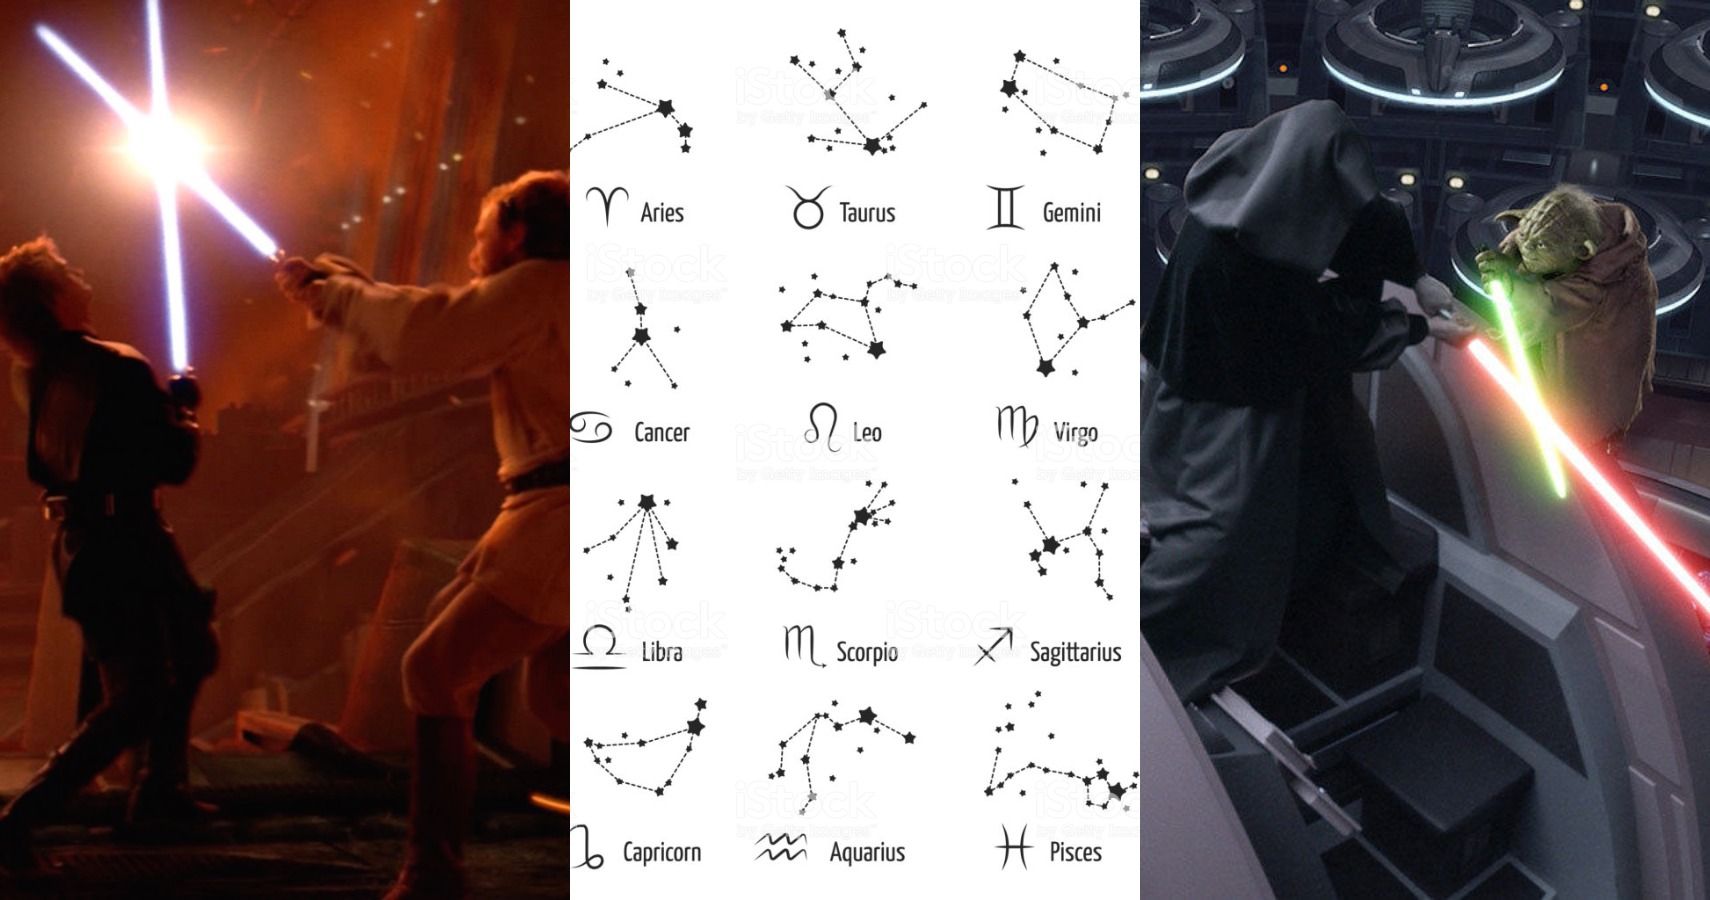 Which Star Wars Prequel Character Are You, Based on Your Horoscope Sign?